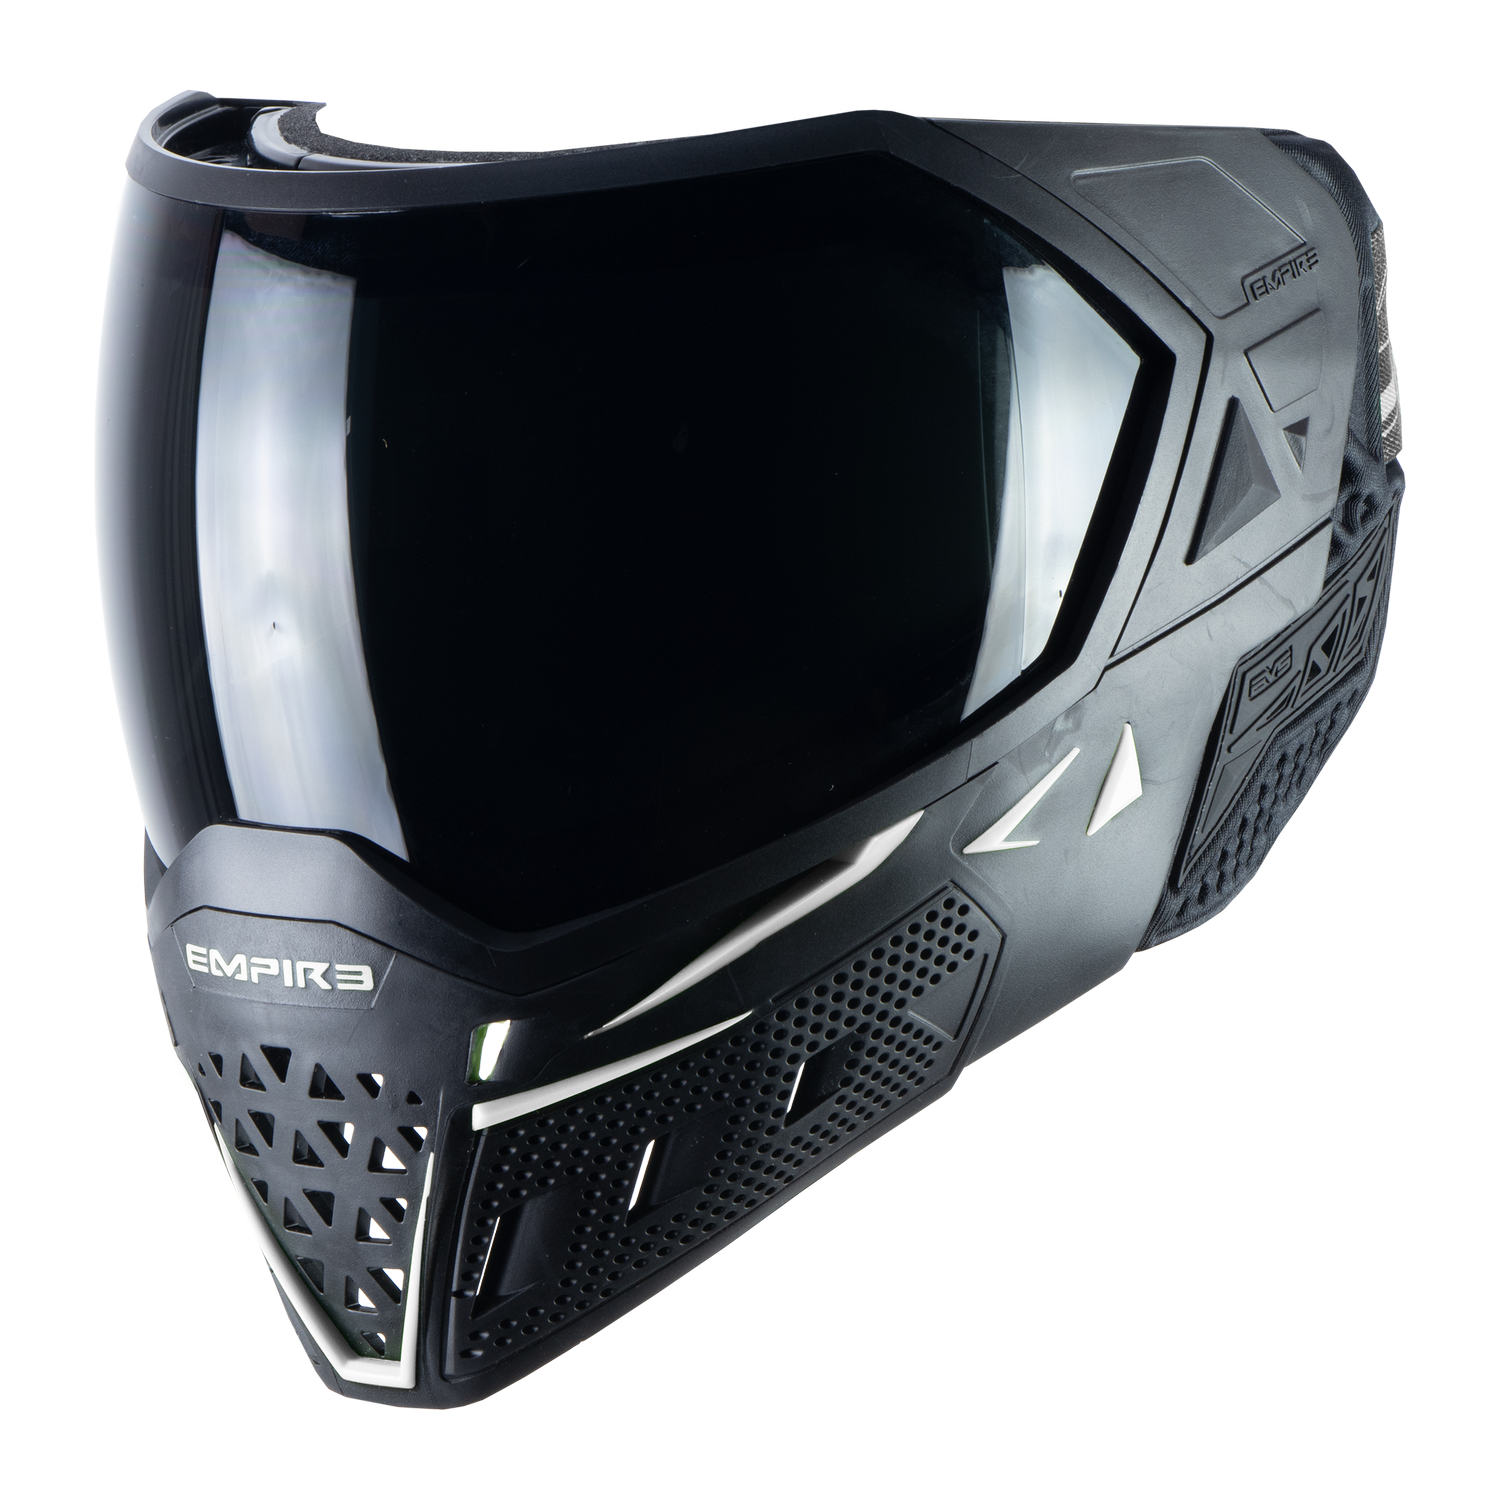 Empire EVS Goggle SE Black / White - Thermal Ninja Lens - Eminent Paintball And Airsoft